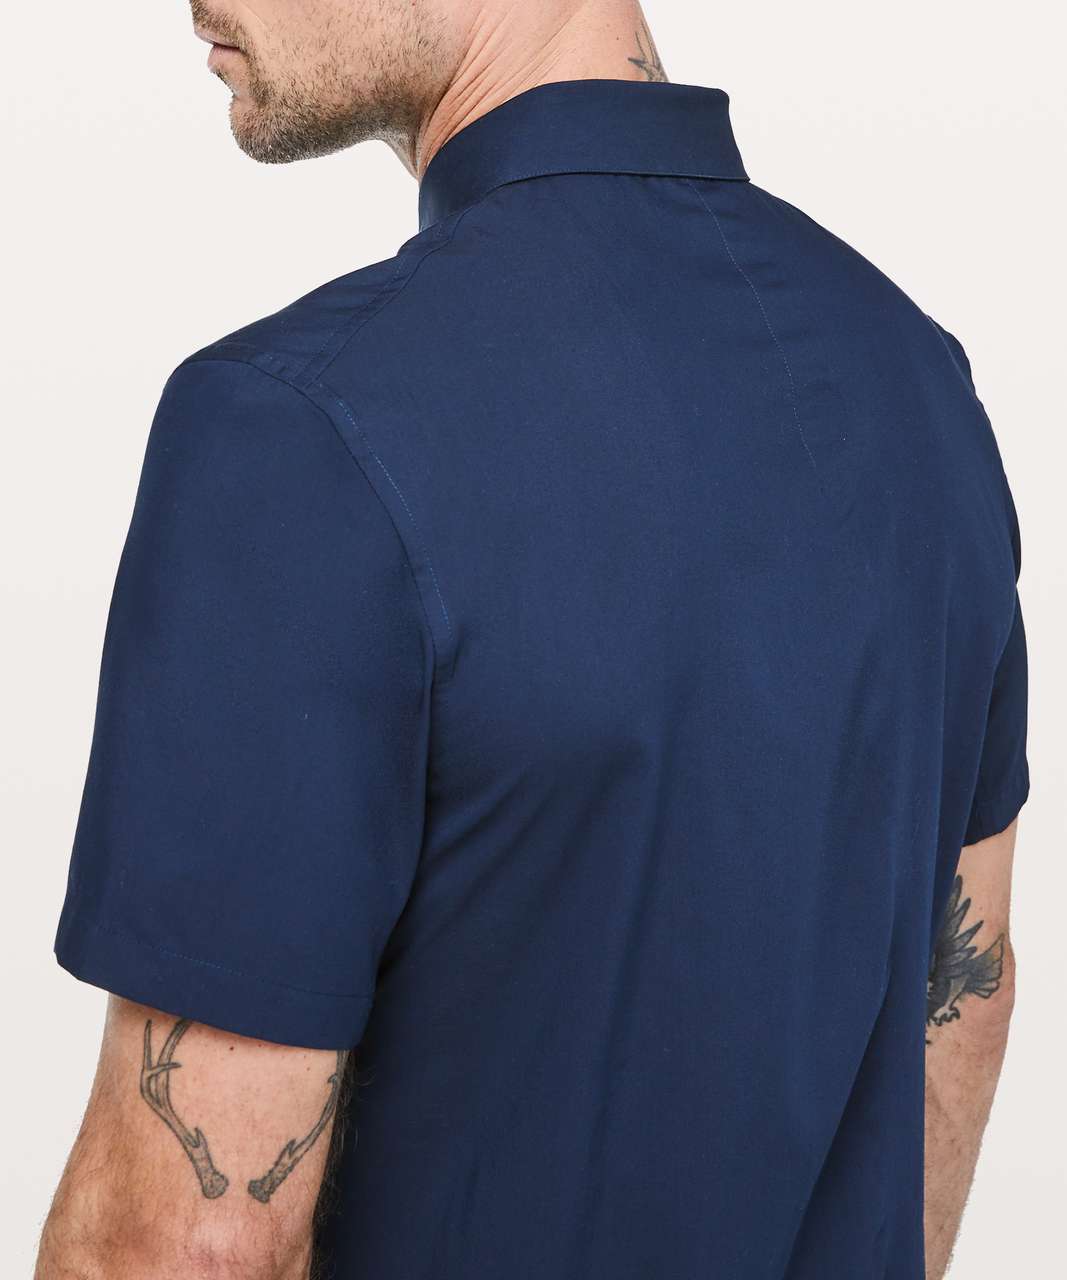 Lululemon Down To The Wire Short Sleeve Shirt - True Navy